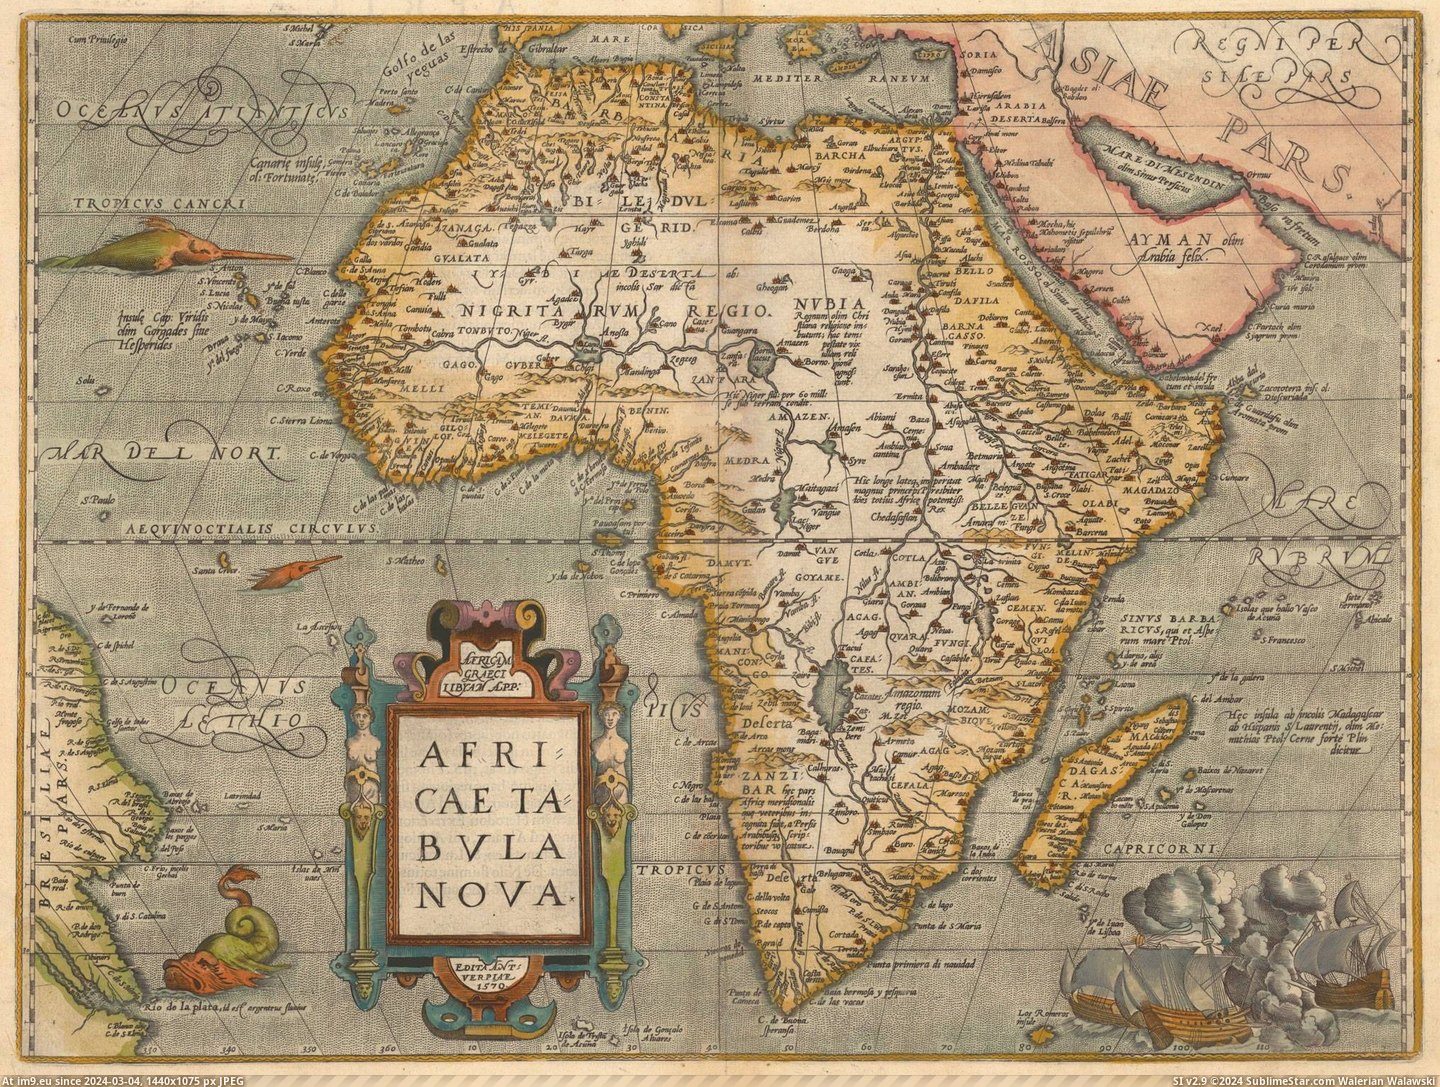 #Map #Abraham #Ortelius #Africa [Mapporn] 1584 map of Africa by Abraham Ortelius [2,031 x 1,528] Pic. (Изображение из альбом My r/MAPS favs))